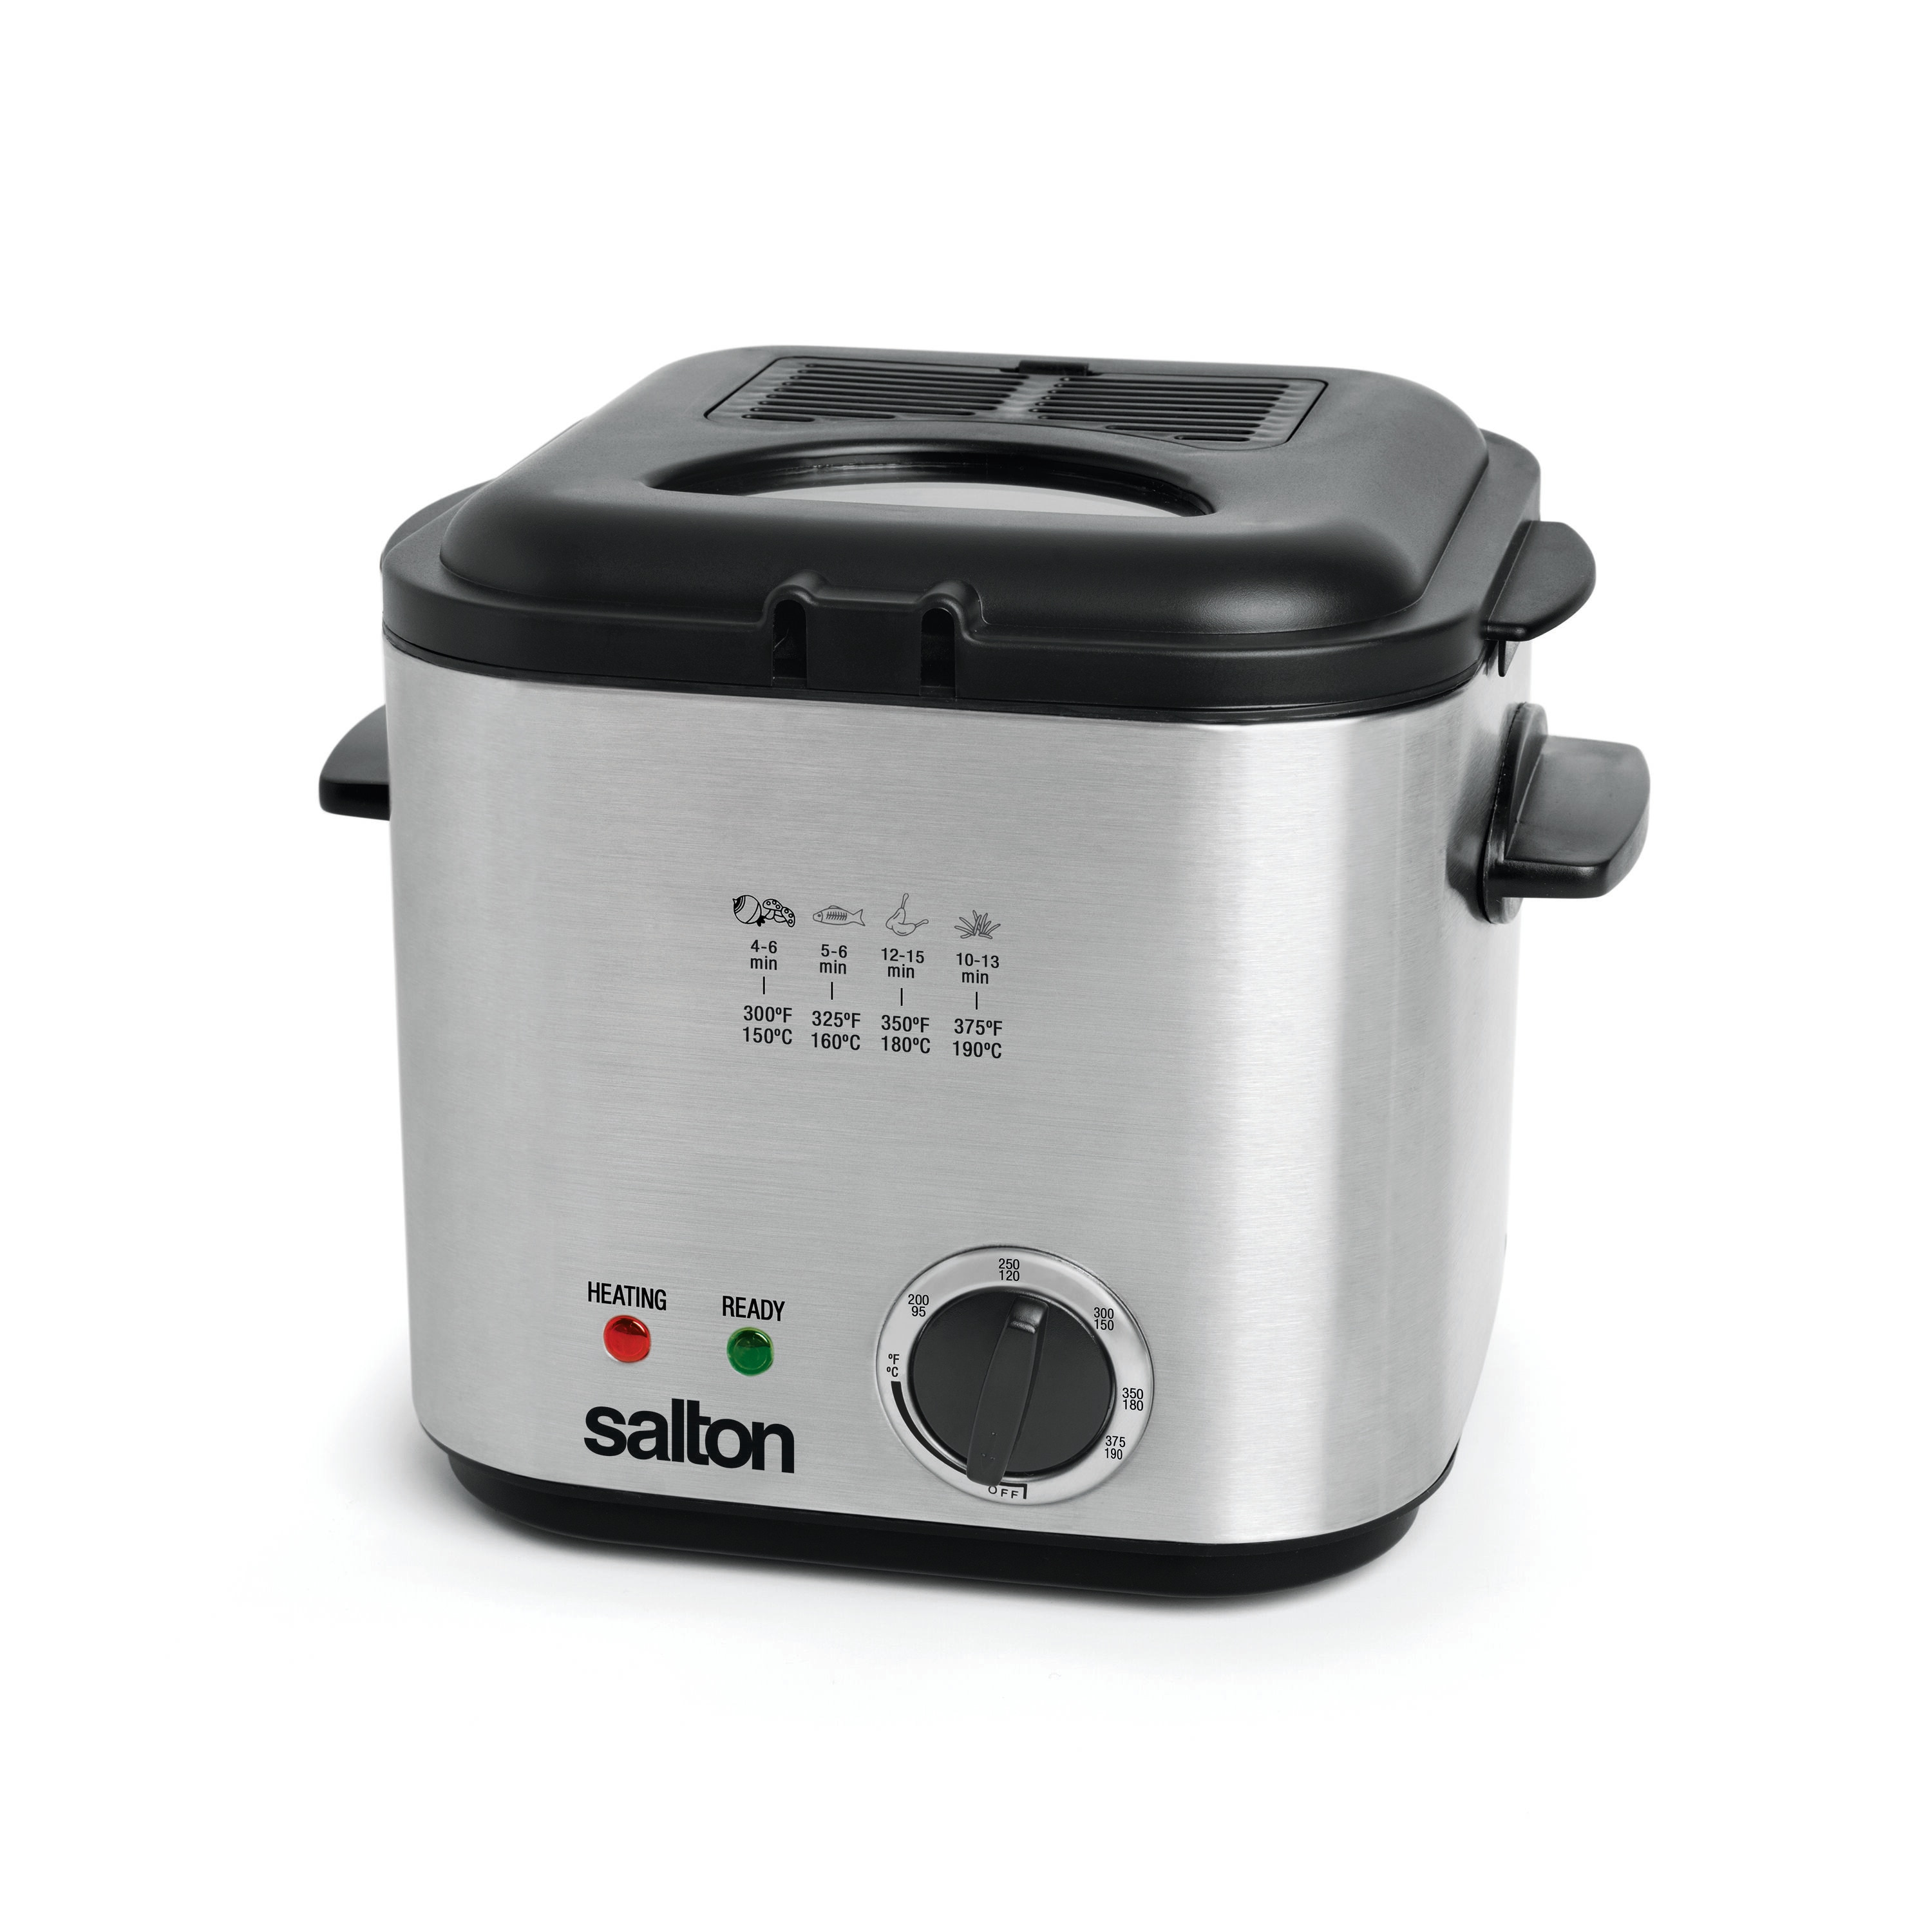 Cuisinart CDF-200P1 Professional Deep Fryer, 4-Quart Capacity, Stainless  Steel, UL Safety Listed, Removable Fry Basket